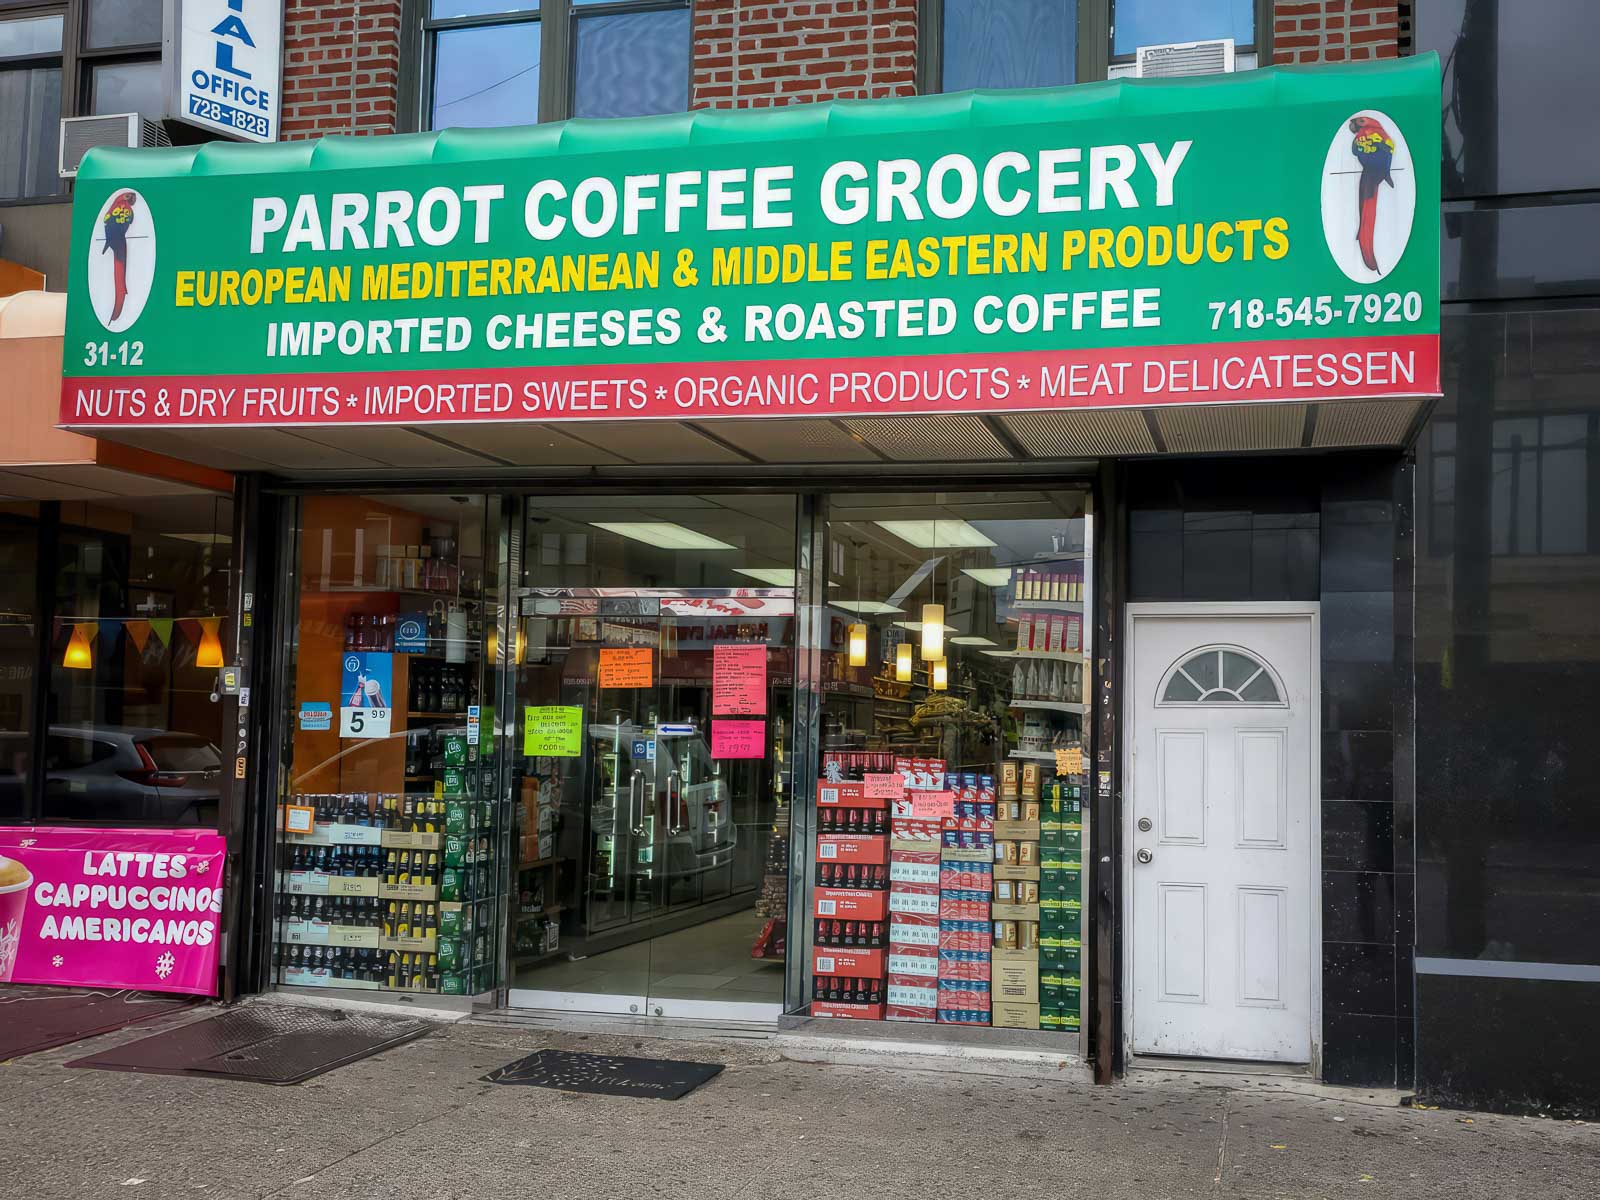 Exterior view of Parrot Coffee Grocery, featuring a green awning with the store's name, logos, and a list of offerings including European Mediterranean & Middle Eastern products, imported cheeses, roasted coffee, and other gourmet foods.